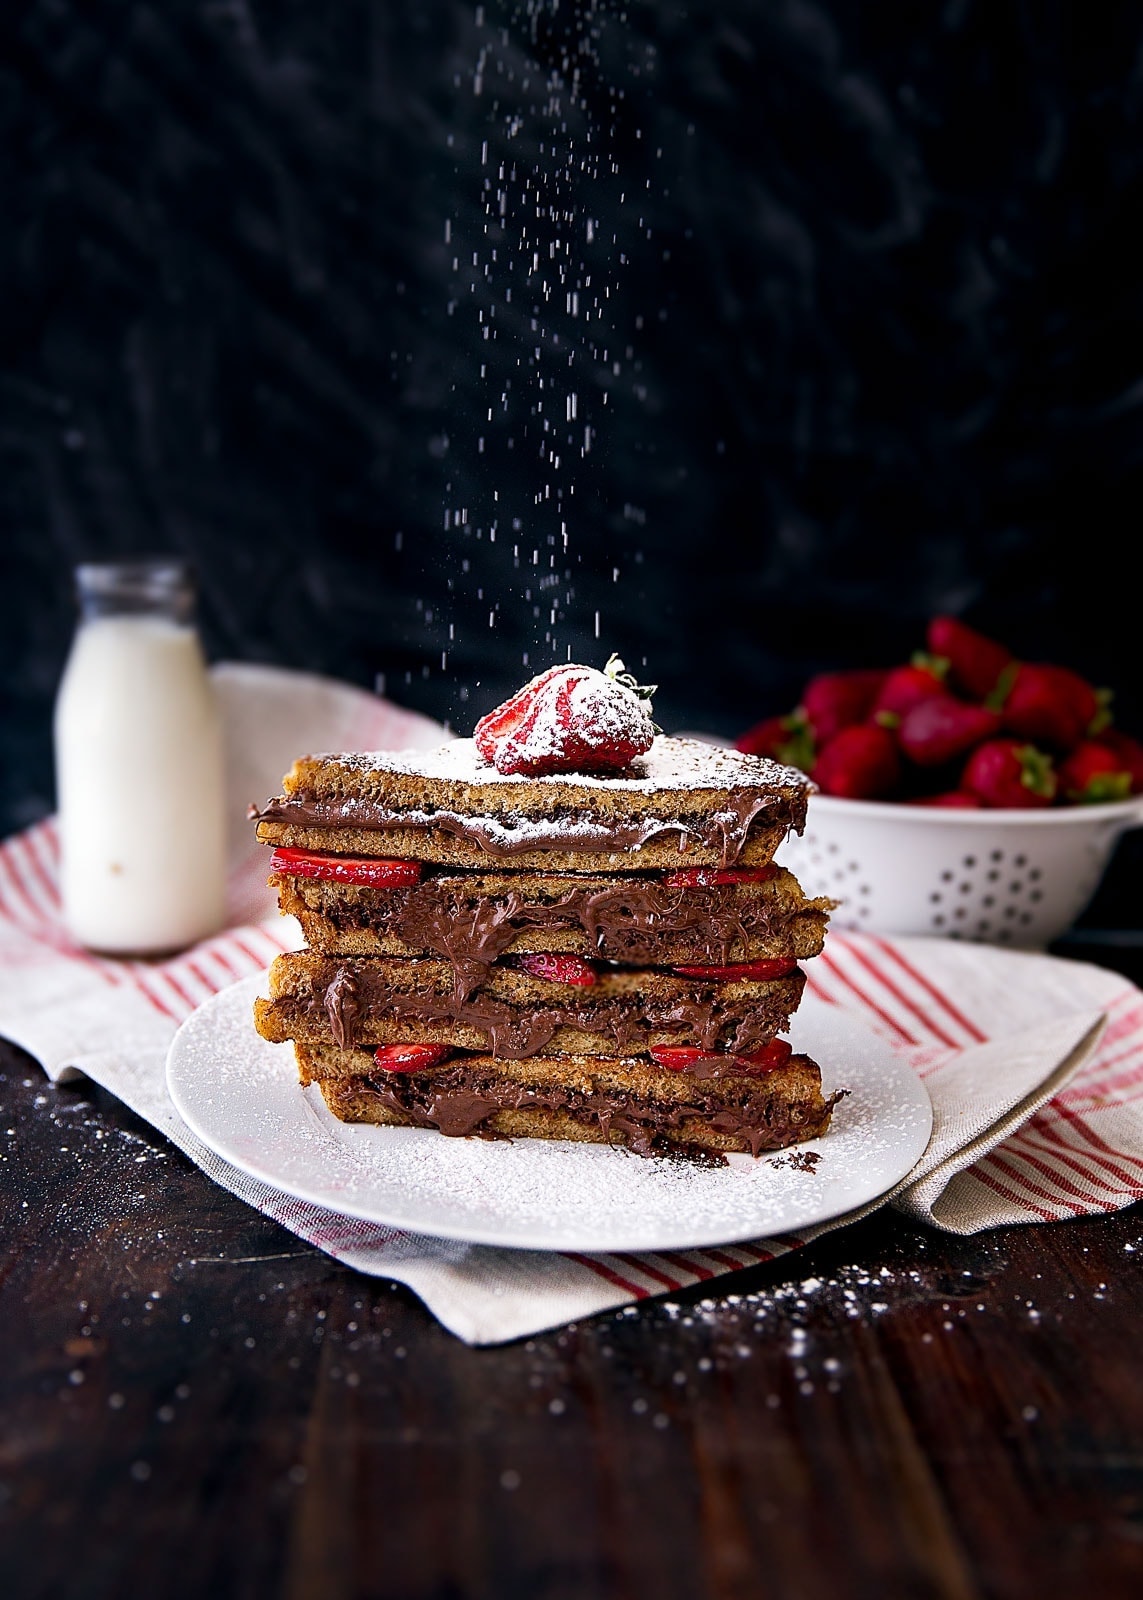 Custardy slices of french toast stuffed with rich and creamy Nutella and tart strawberries. Hubba hubba.